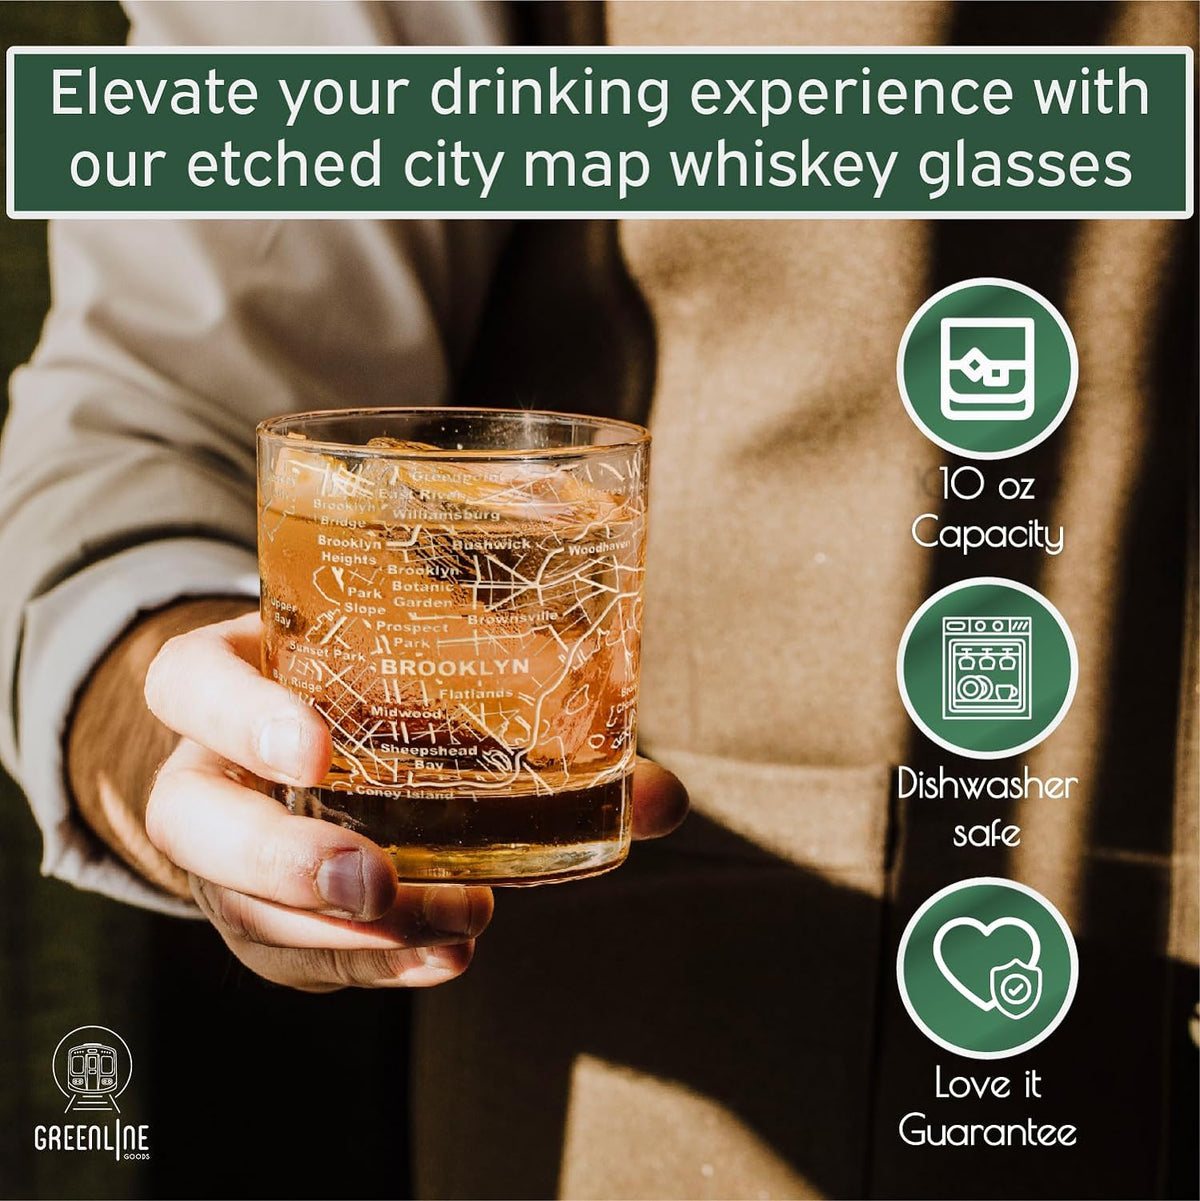 Whiskey Glasses - 10 Oz Tumbler for Brooklyn Lovers (Single Glass) - Etched with Brooklyn Map - Old Fashioned Rocks Glass